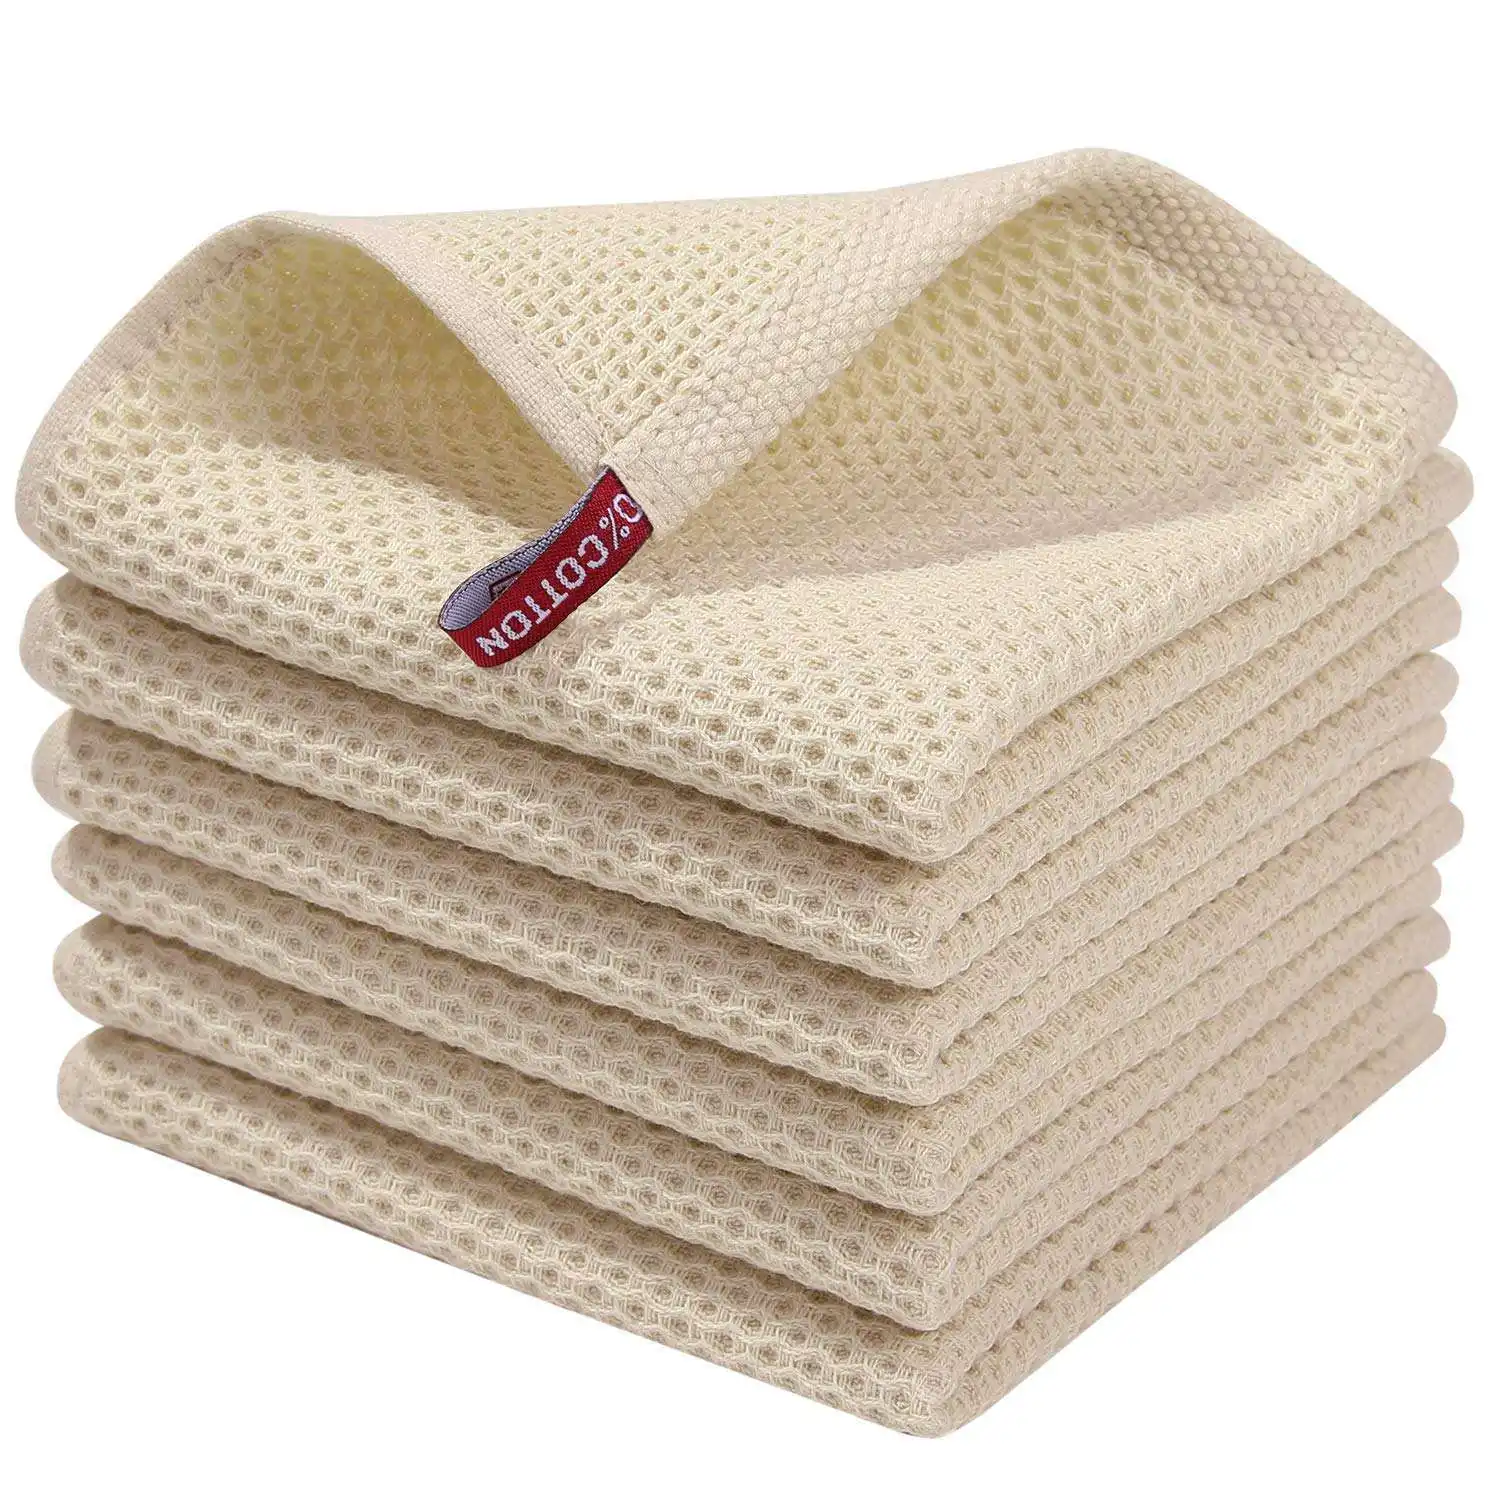 Best Selling 100% Cotton Waffle Weave Kitchen Ultra Soft Absorbent Quick Drying Dish Towel Honeycomb Set